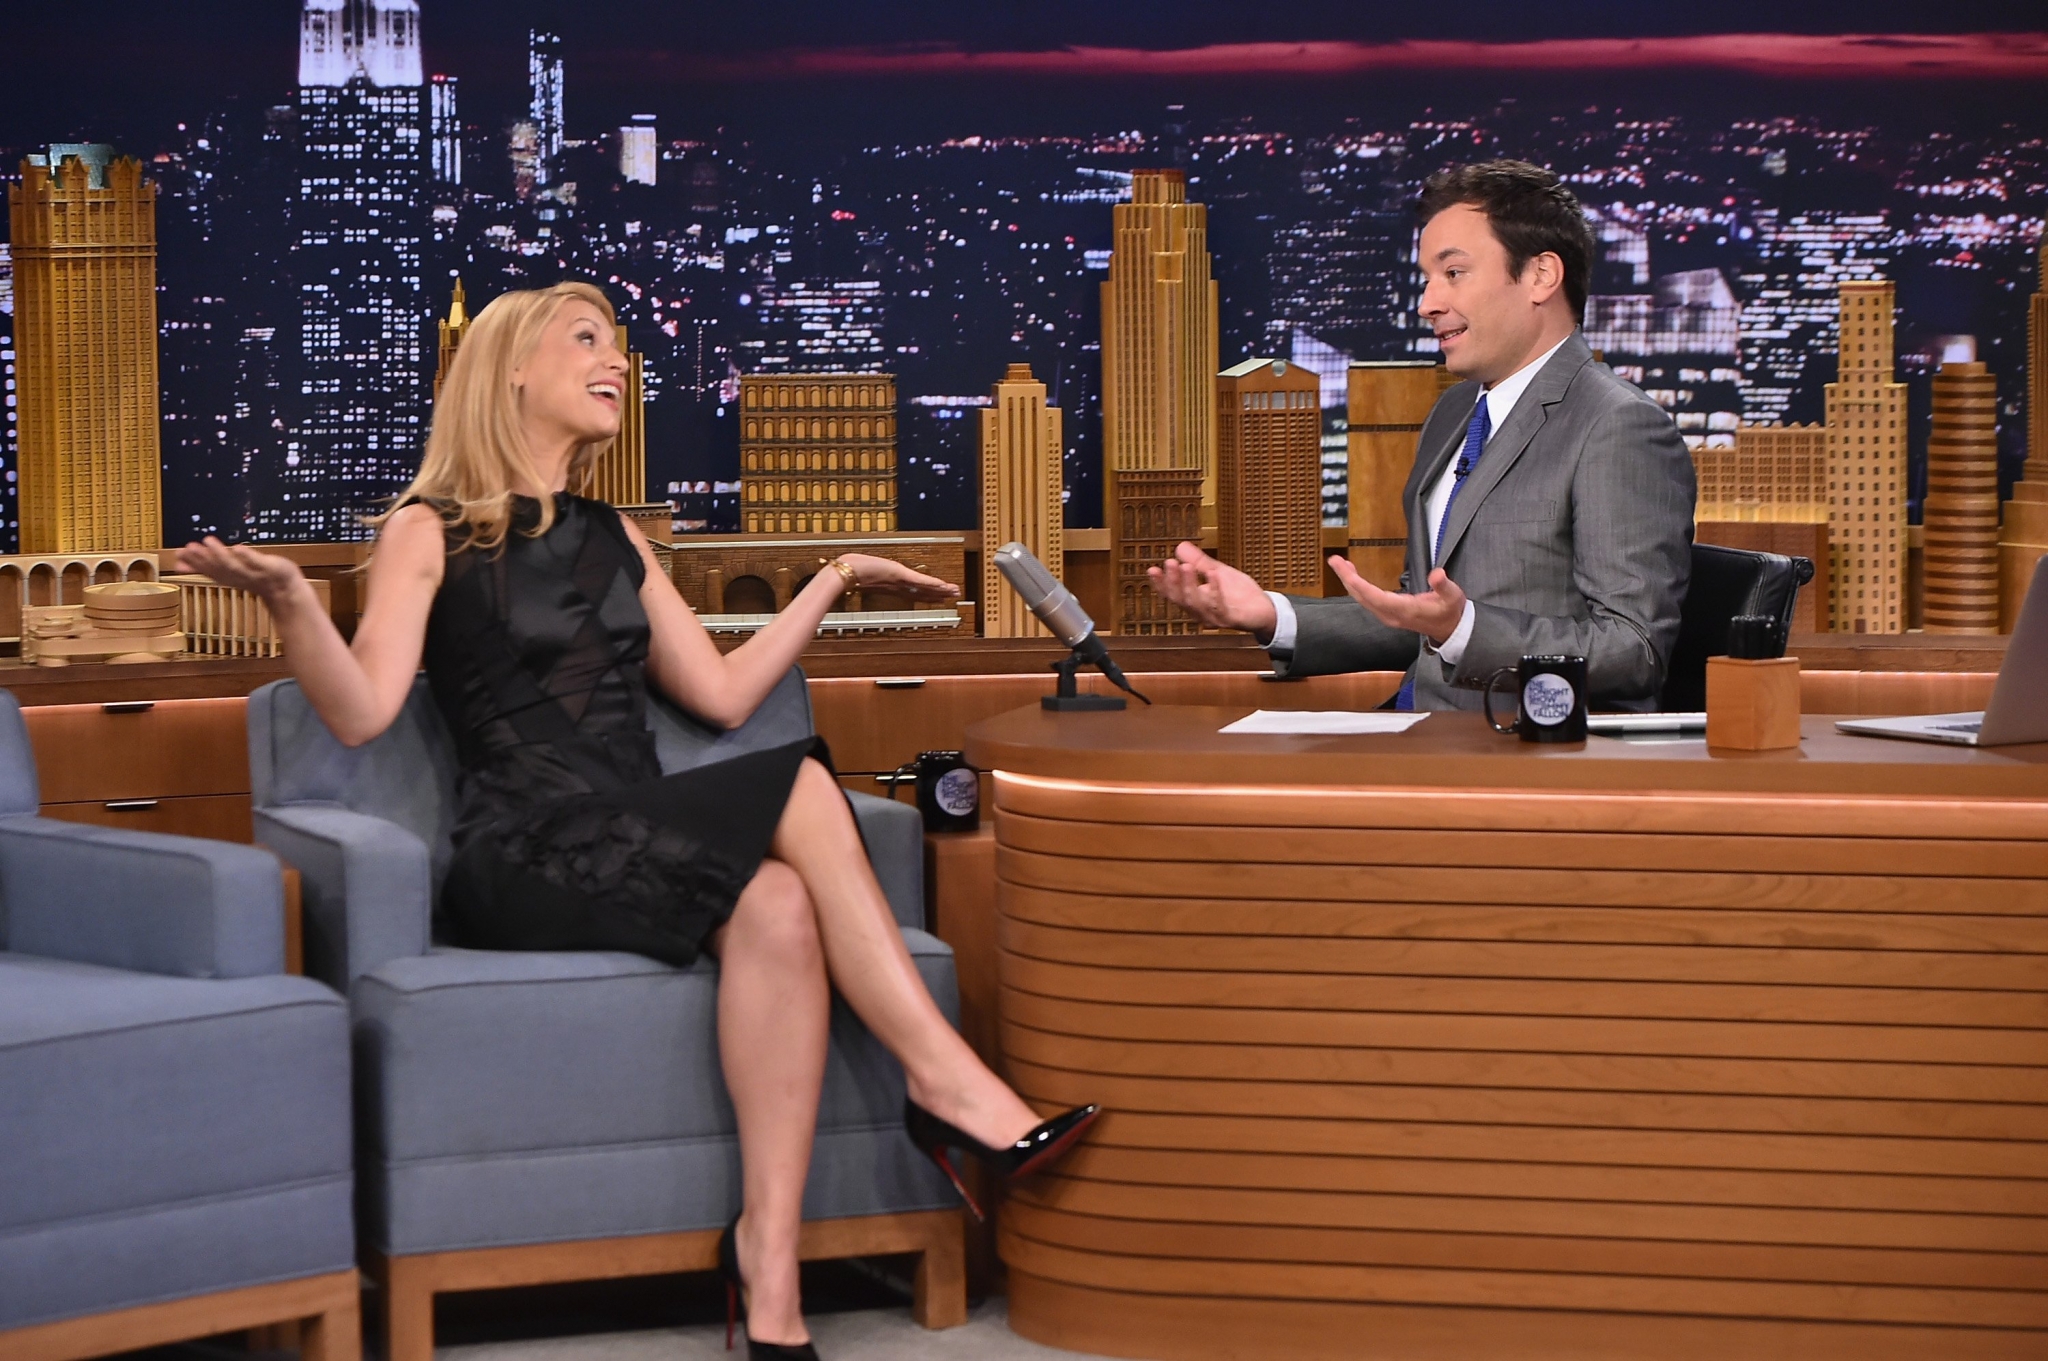 2014-09-05-The-Tonight-Show-With-Jimmy-Fallon-004.jpg